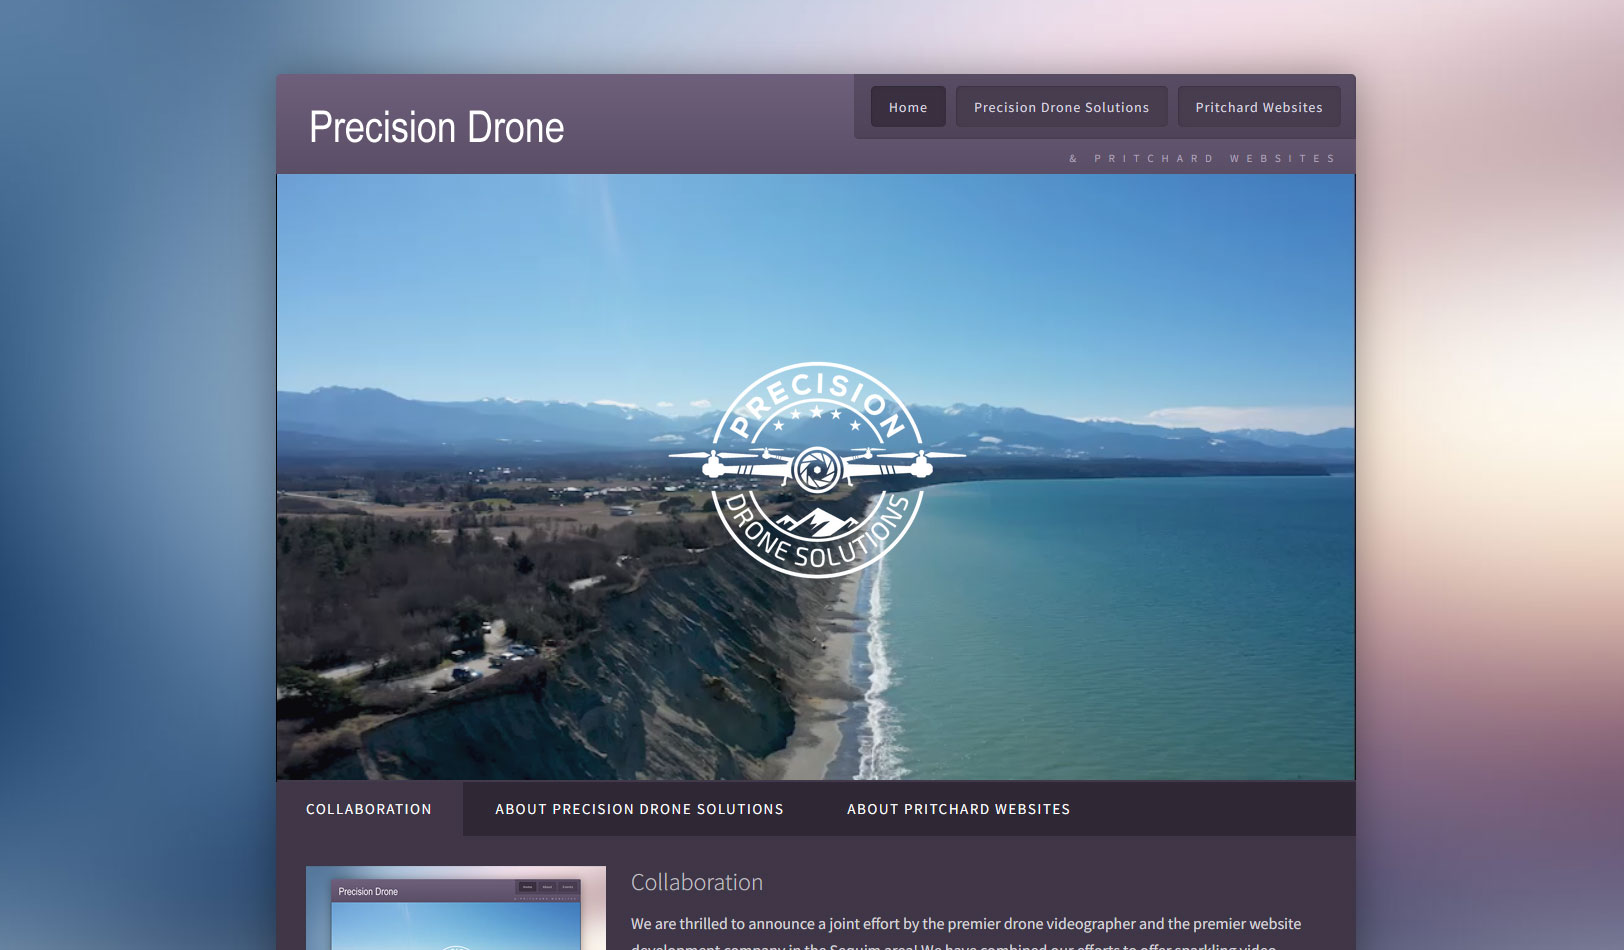 images/Portfolio-images/Precision-Drone.jpg#joomlaImage://local-images/Portfolio-images/Precision-Drone.jpg?width=1624&height=950